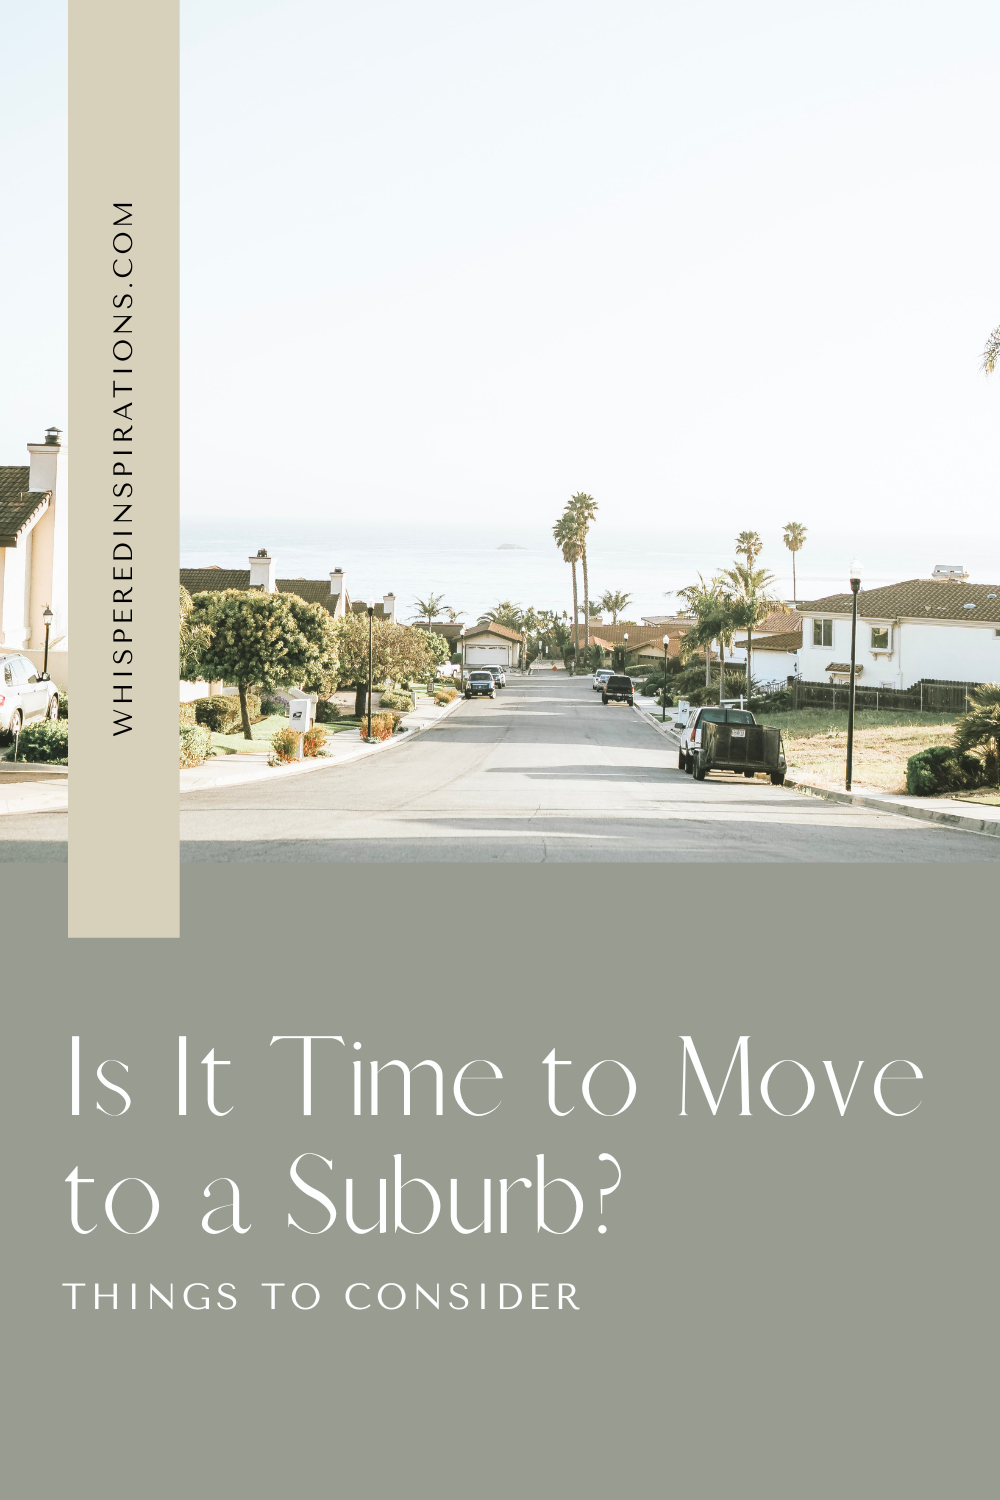 The suburbs are shown with palm trees lining the street. This article covers the question,is it time to move a suburb?